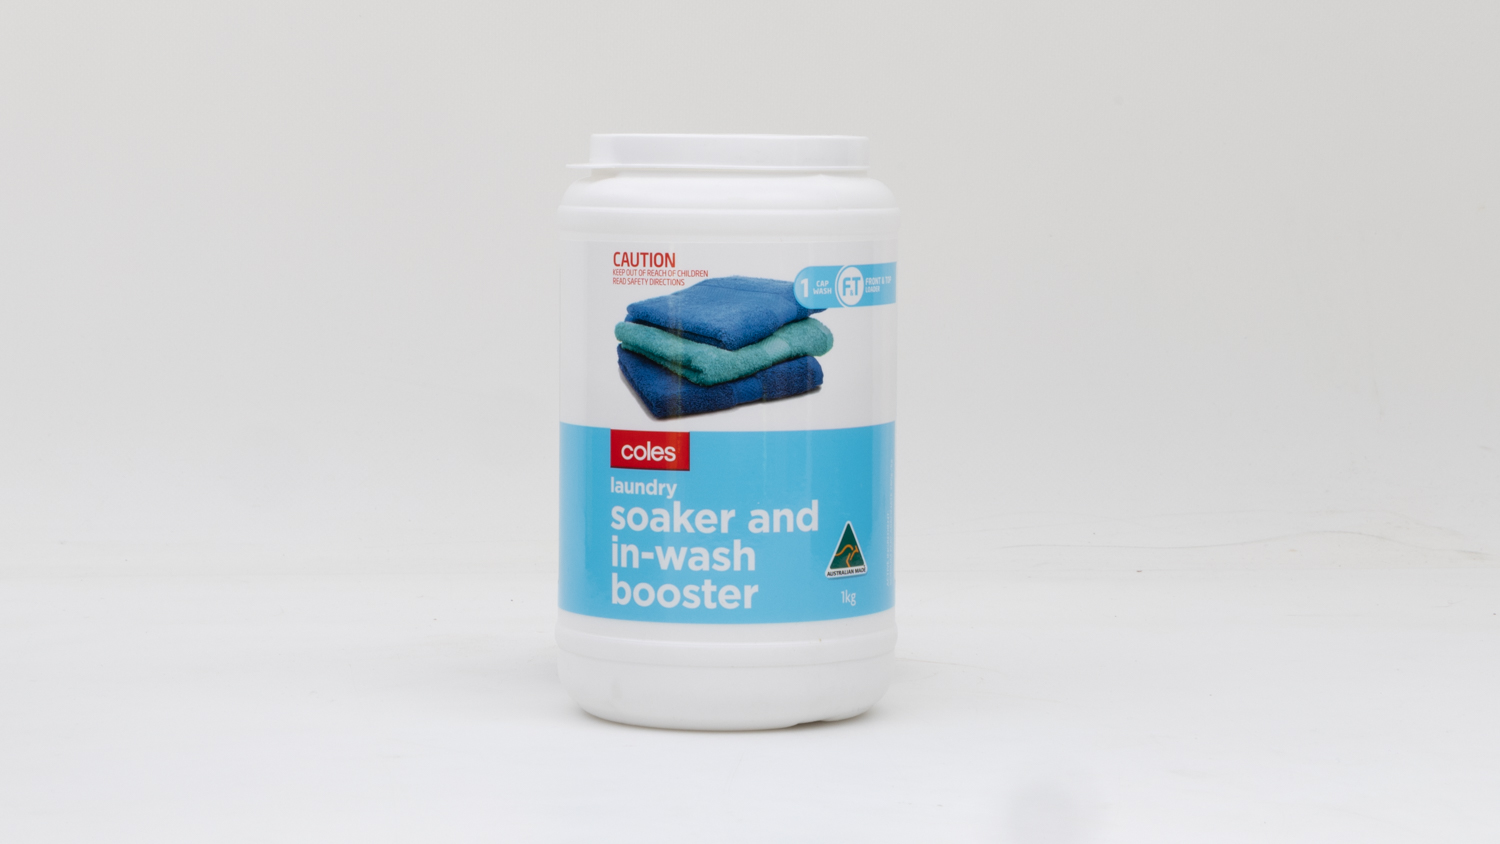 Coles Laundry Soaker and In-Wash Booster carousel image